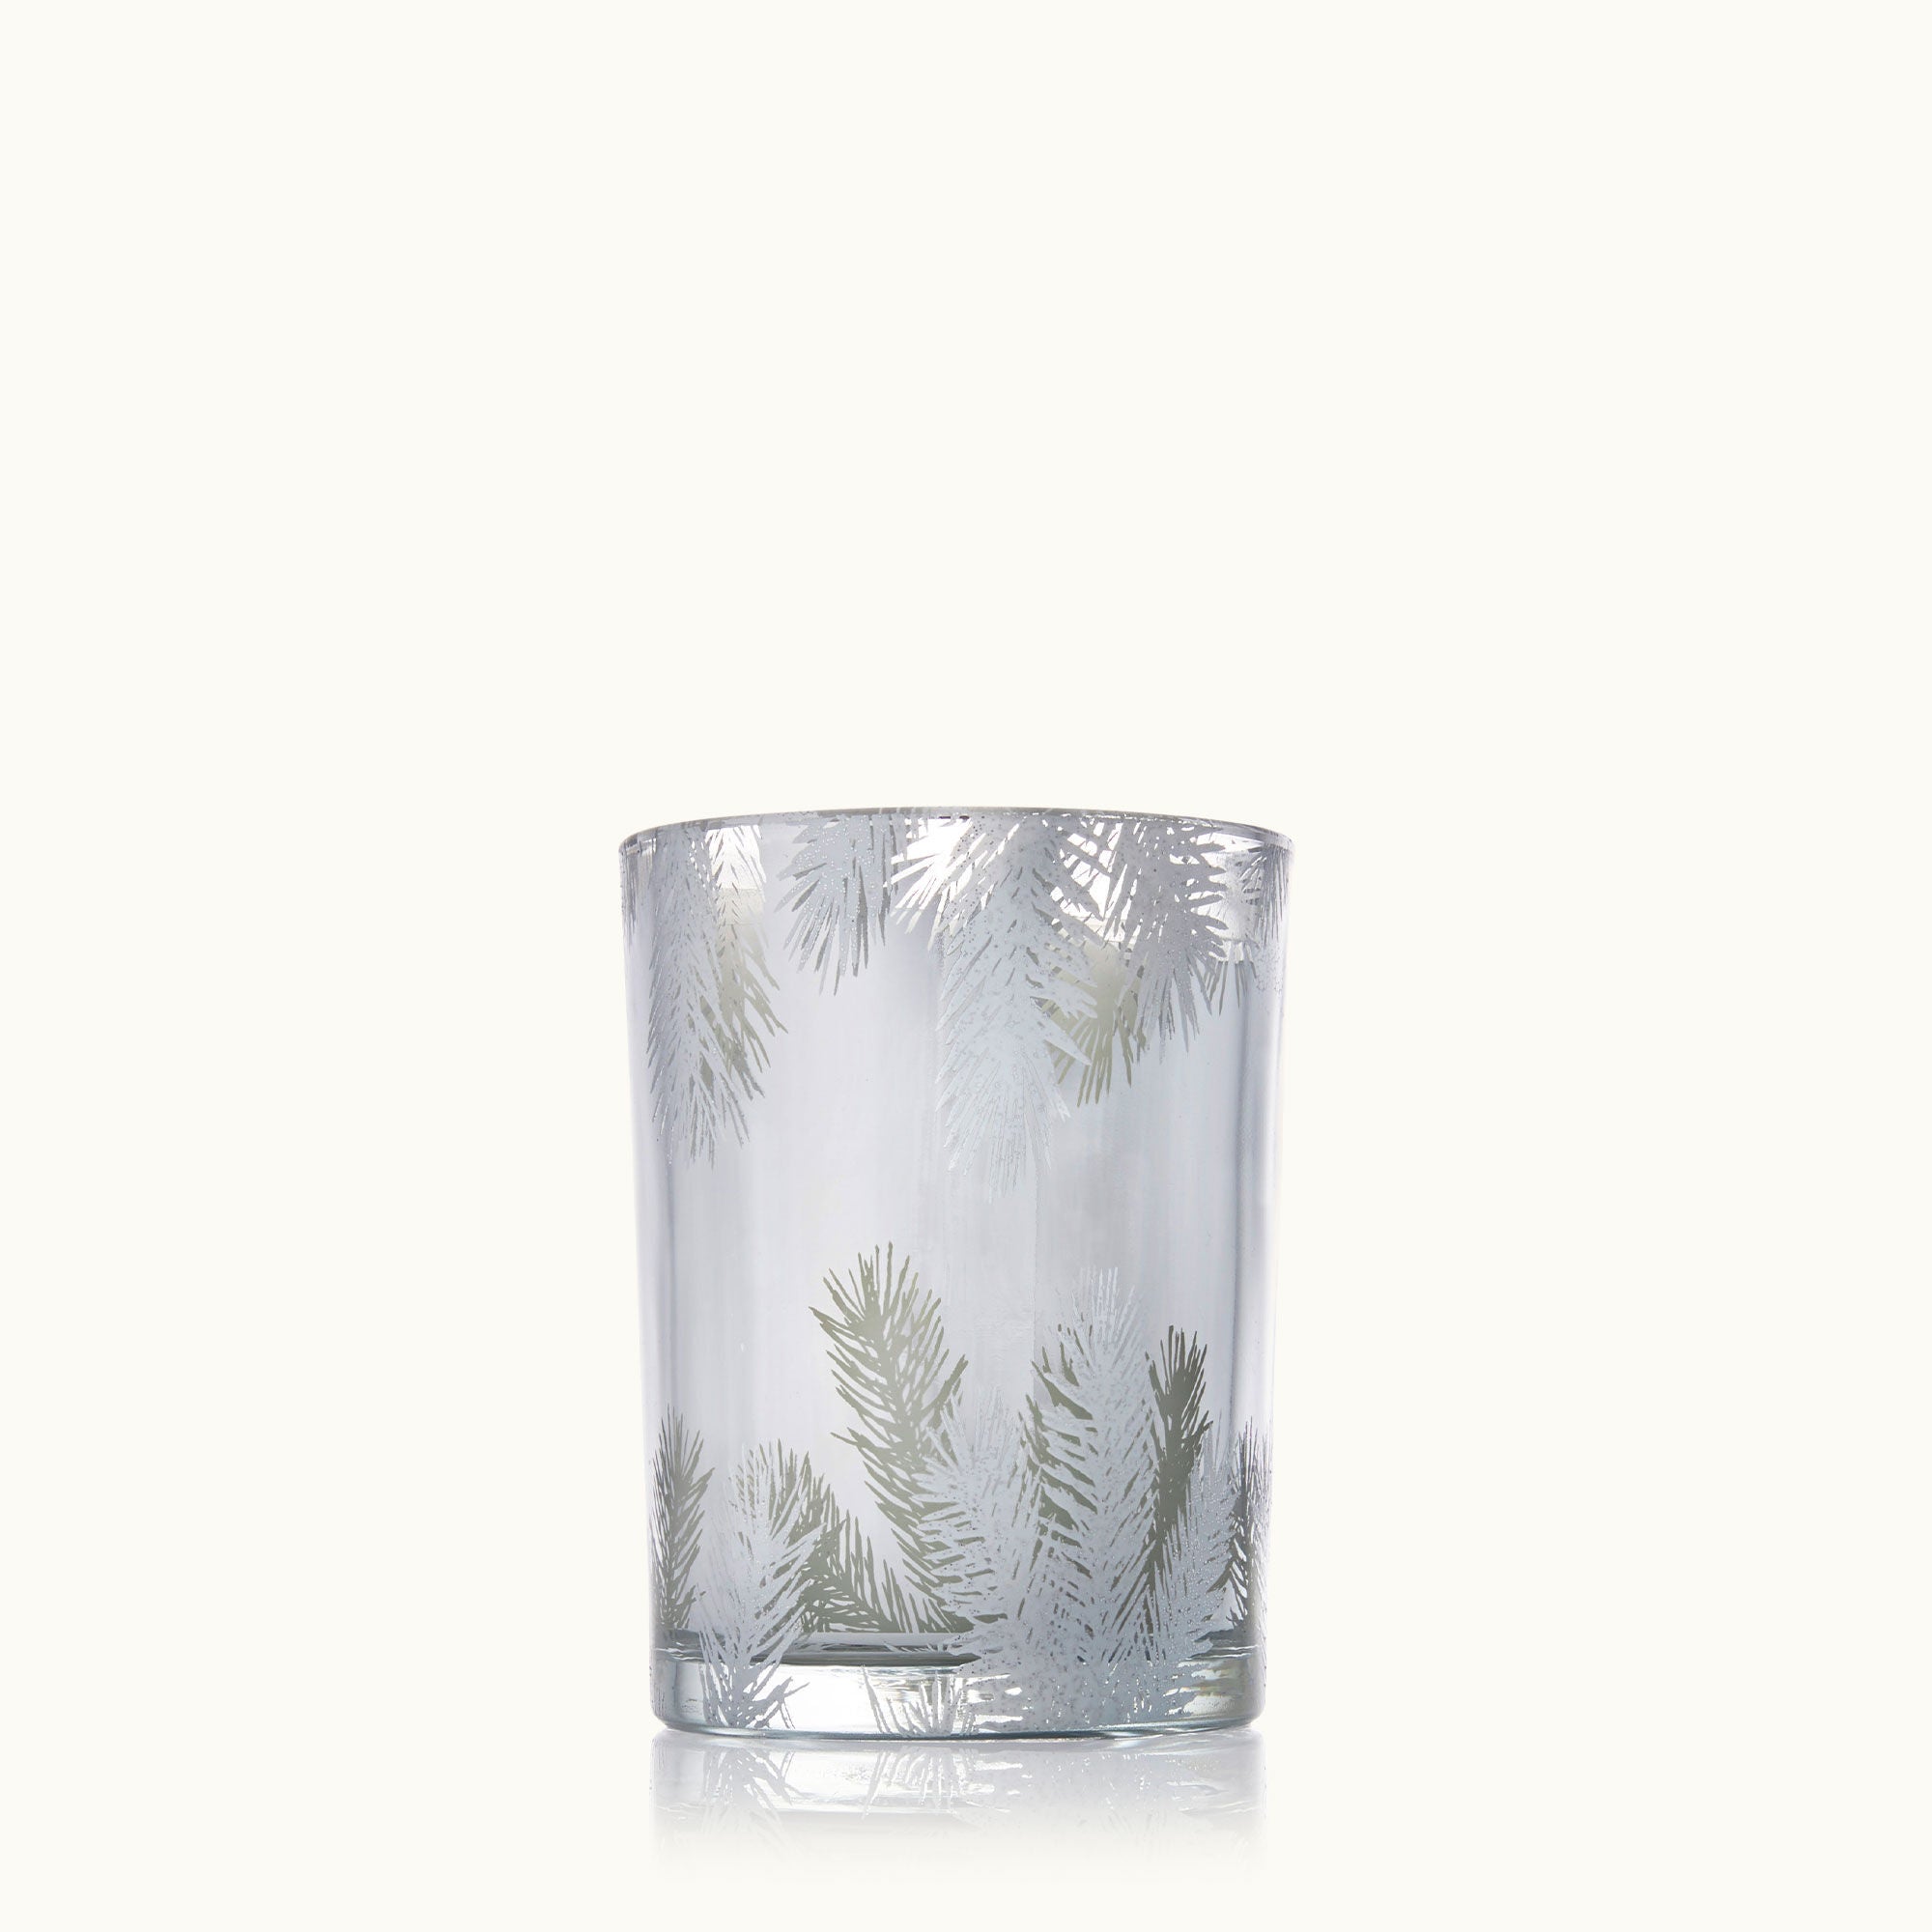 Thymes Frasier Fir Statement Small Luminary Poured Candle